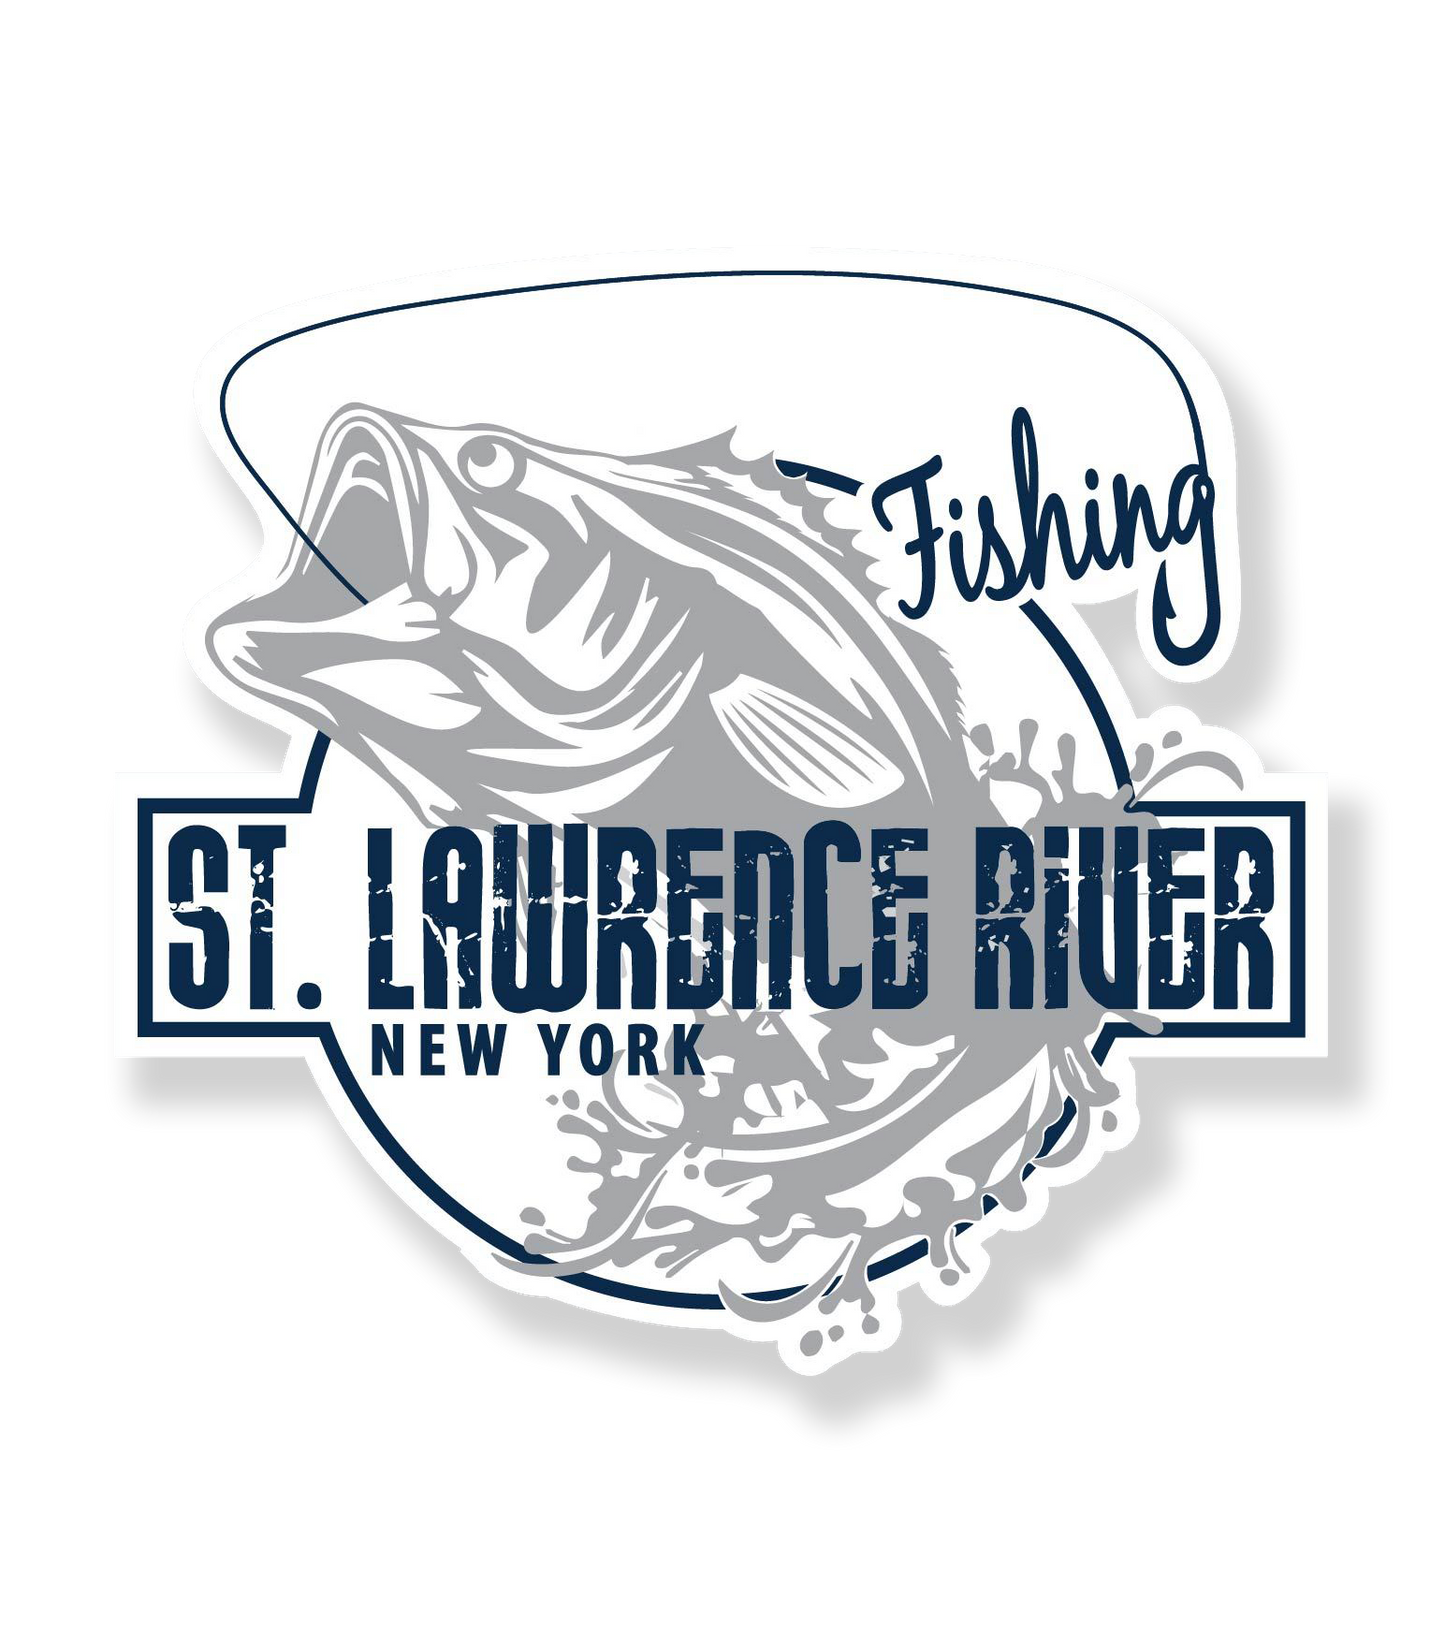 St. Lawrence River Fishing Vinyl Decal